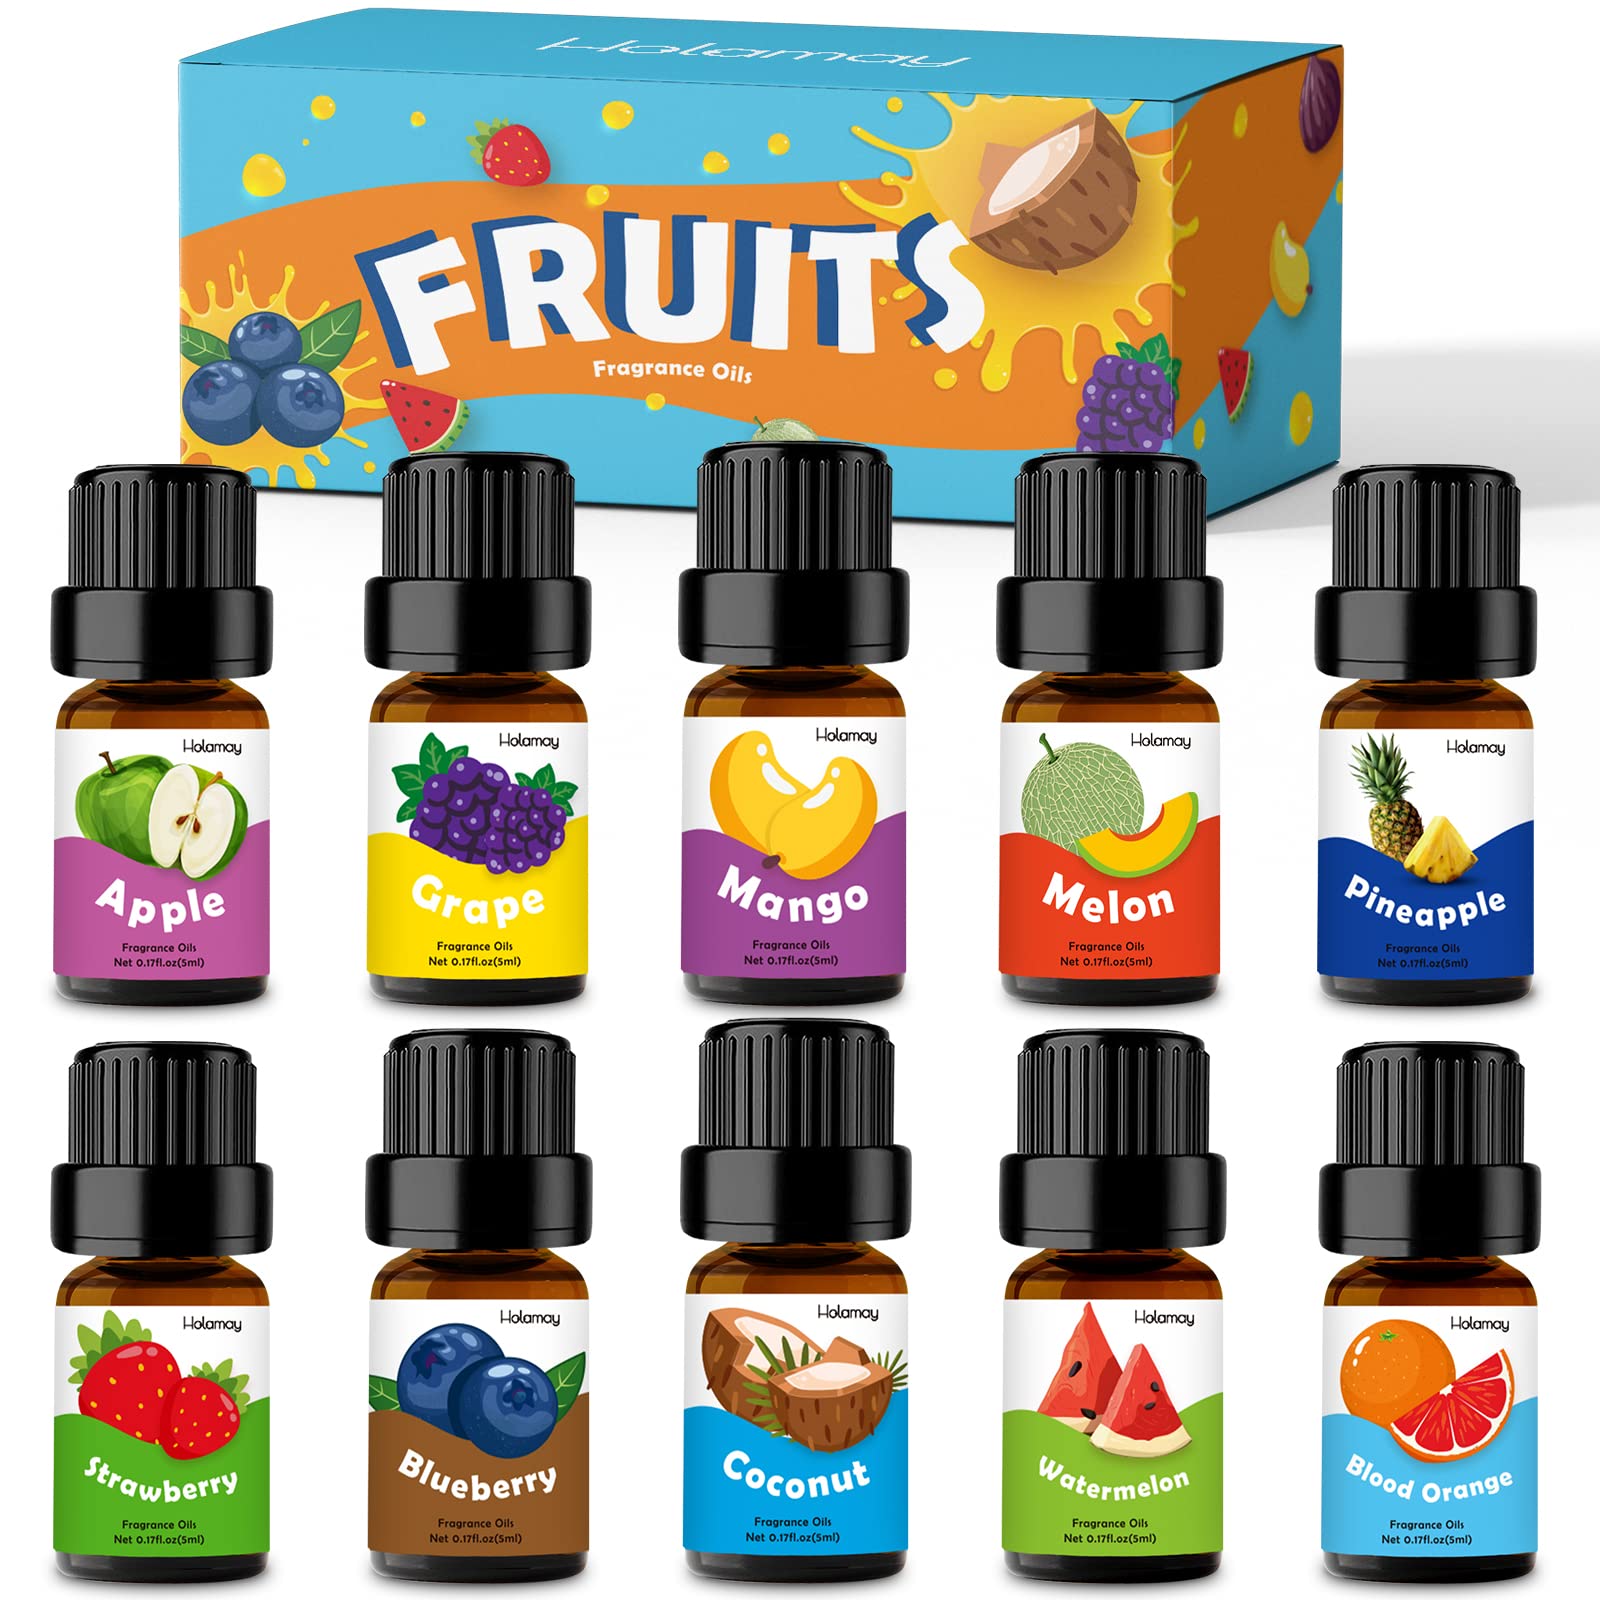 Fruity Fragrance Oil for Candle & Soap Making, Holamay Premium Fruit Essential Oils 5ml x 10 - Coconut, Strawberry, Mango, Pineapple and More